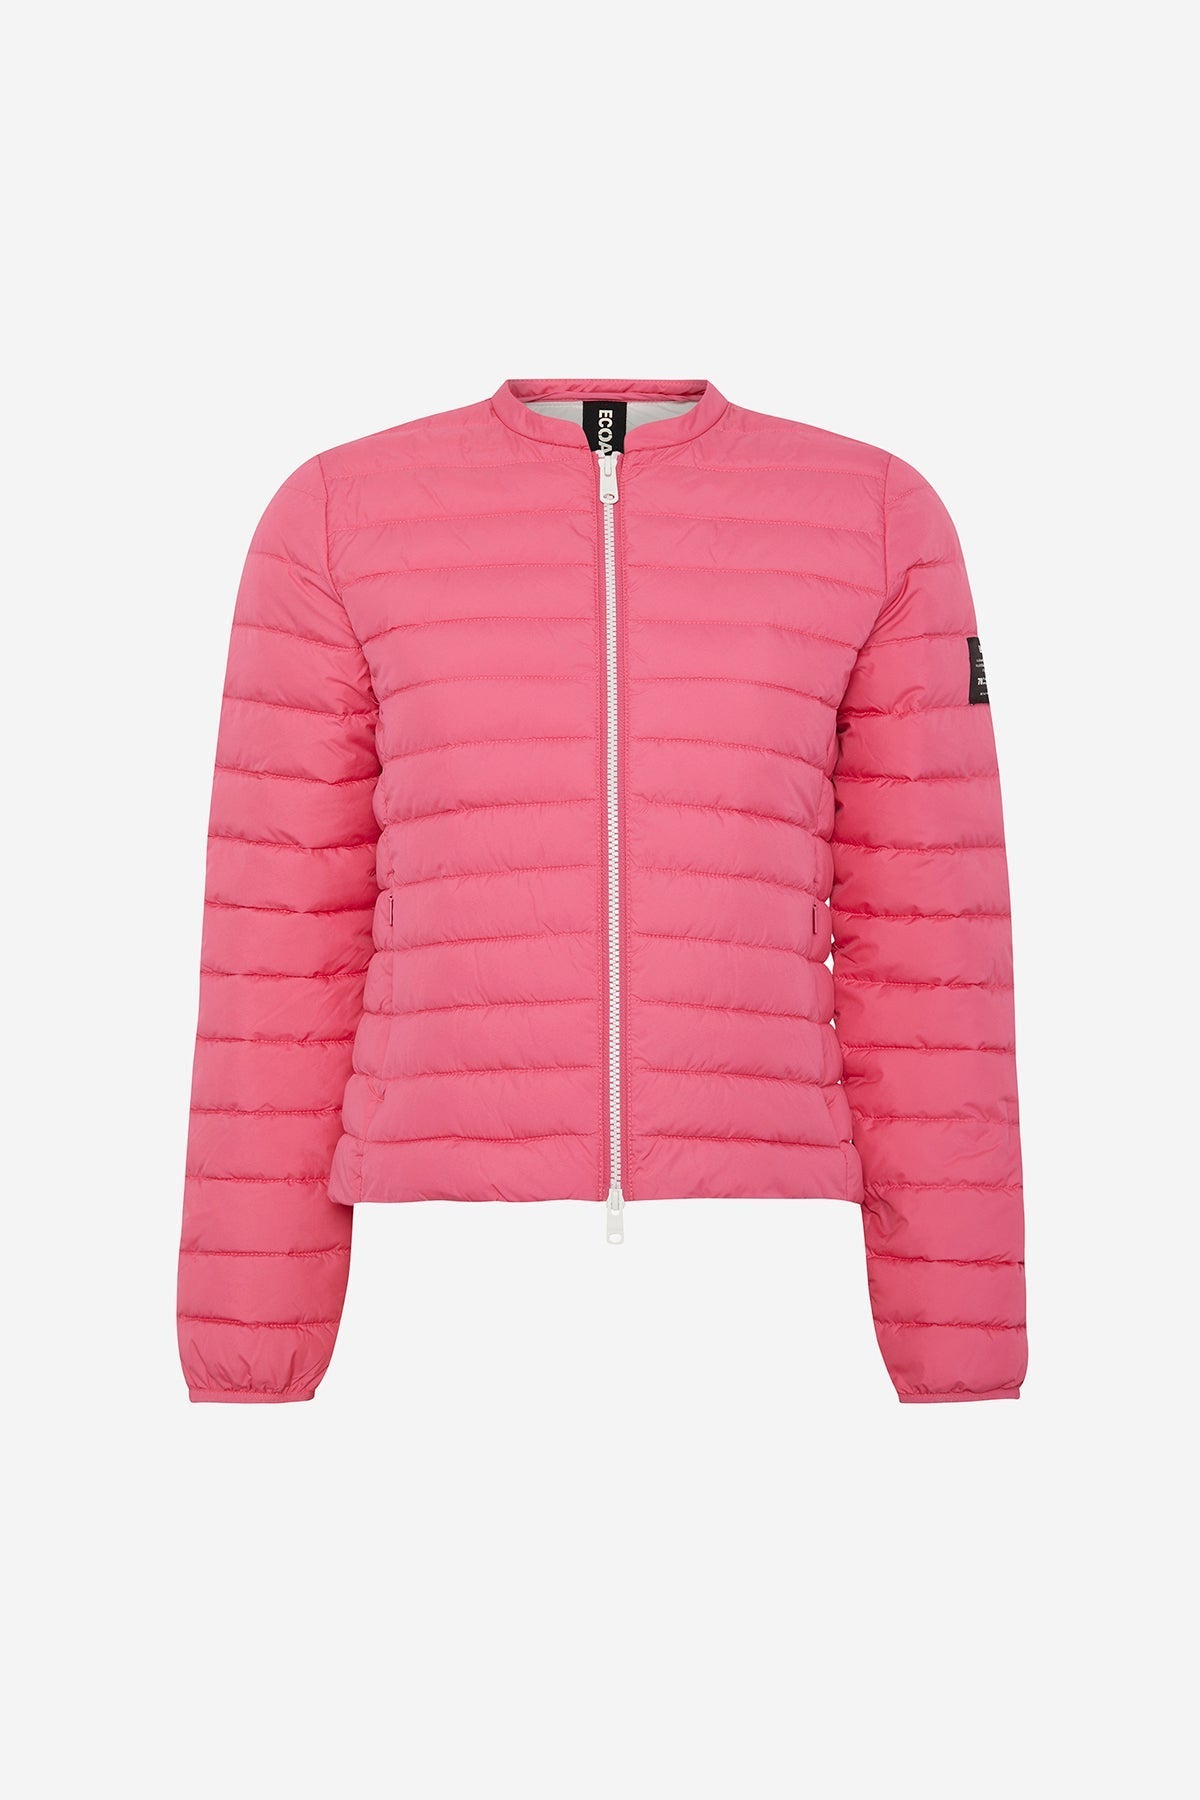 AIA JACKET PINK